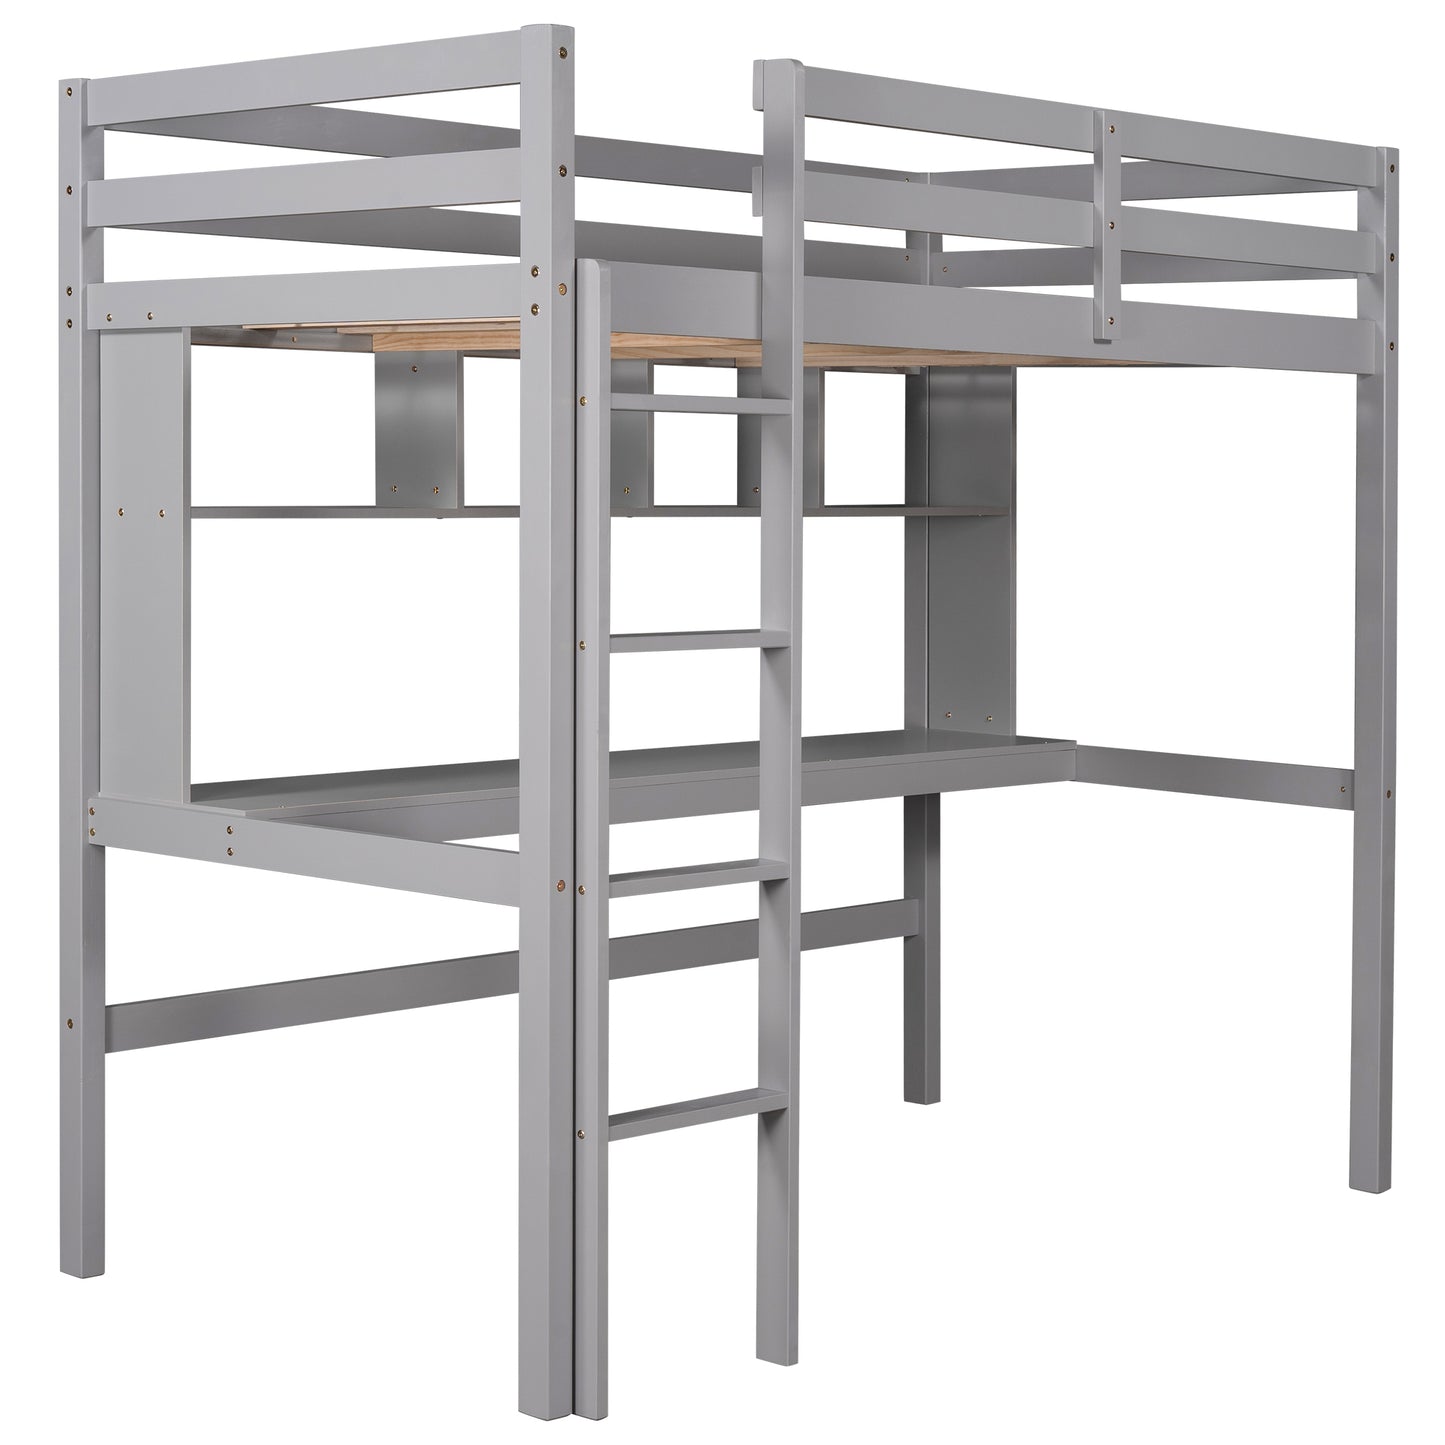 Loft Bed with Desk for Kids, Solid Pine Wood Twin Loft Bunk Bed Frame with Ladder and Built-in Desk for Boys Girls Teens Adults, No Box Spring Needed, Gray, LJ648